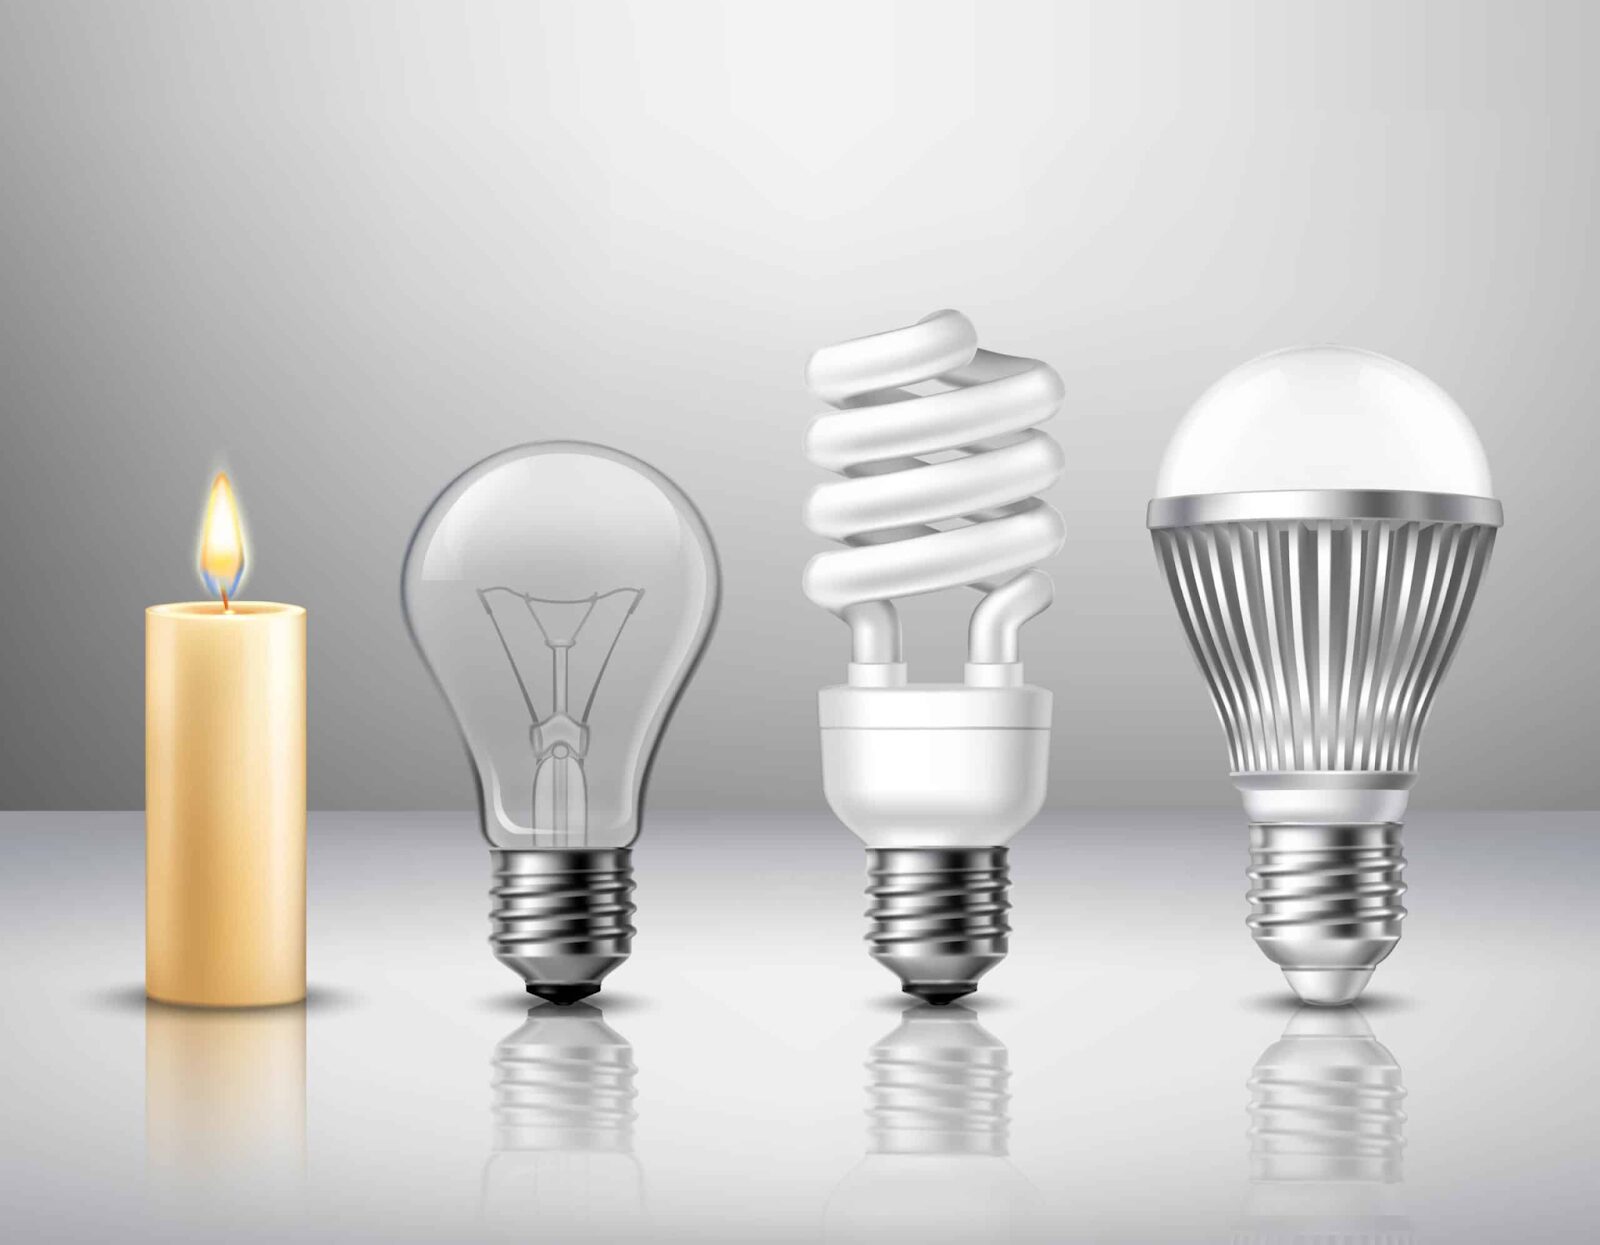 Light Bulbs Throughout the Years